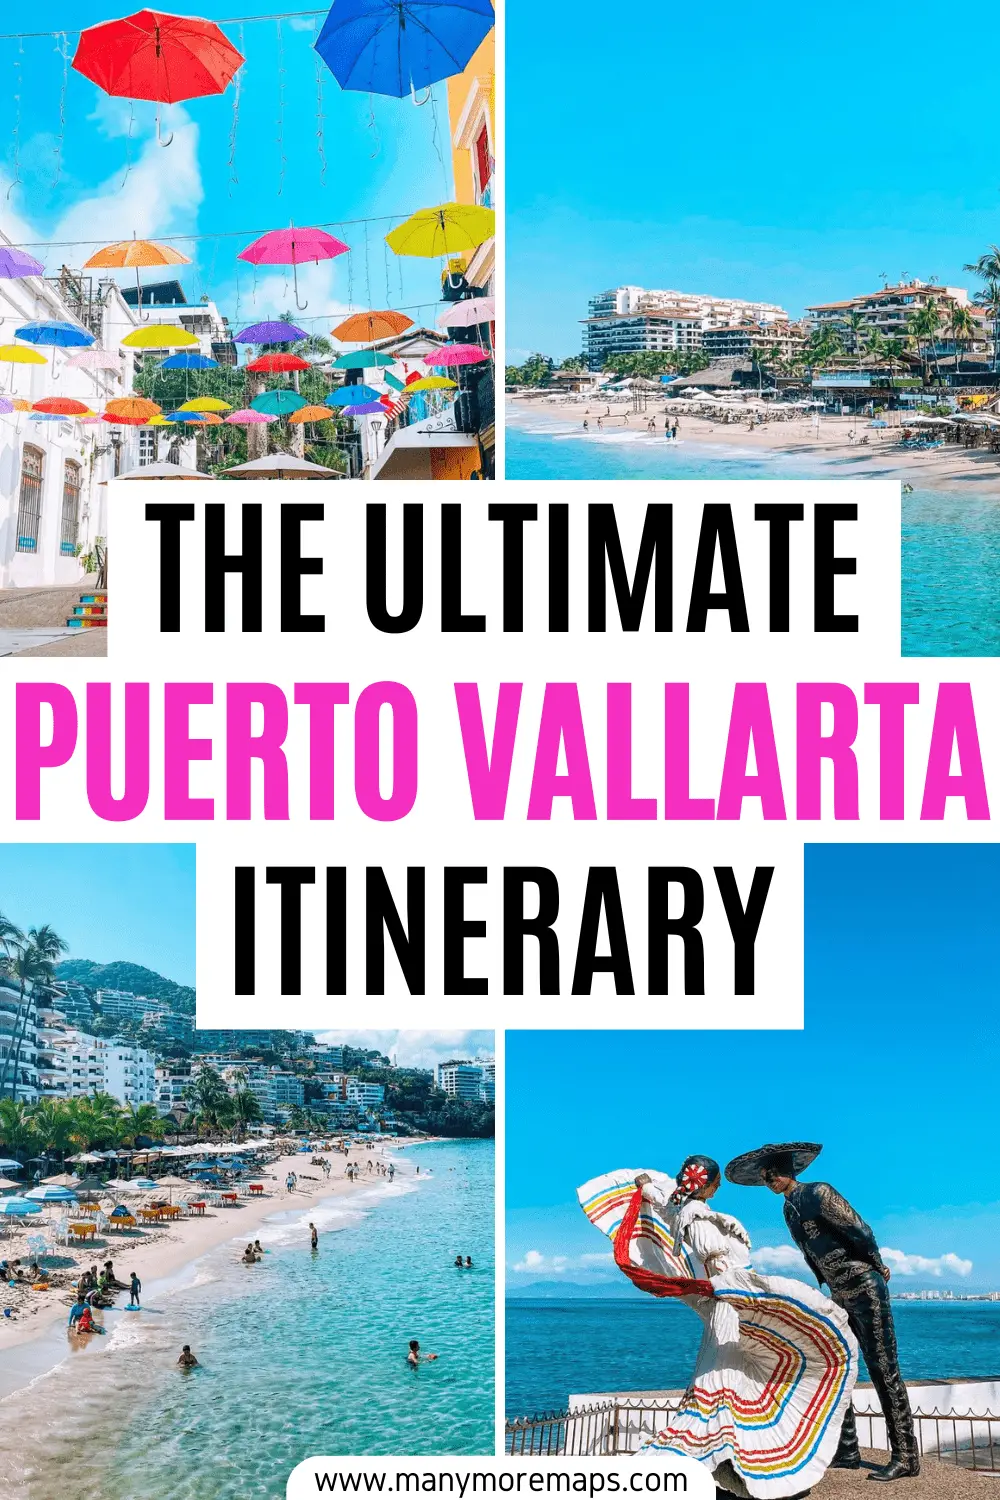 Planning to travel to Puerto Vallarta in Mexico? Then you can't miss this Puerto Vallarta itinerary covering the very best things to do, see, and eat in Puerto Vallarta!